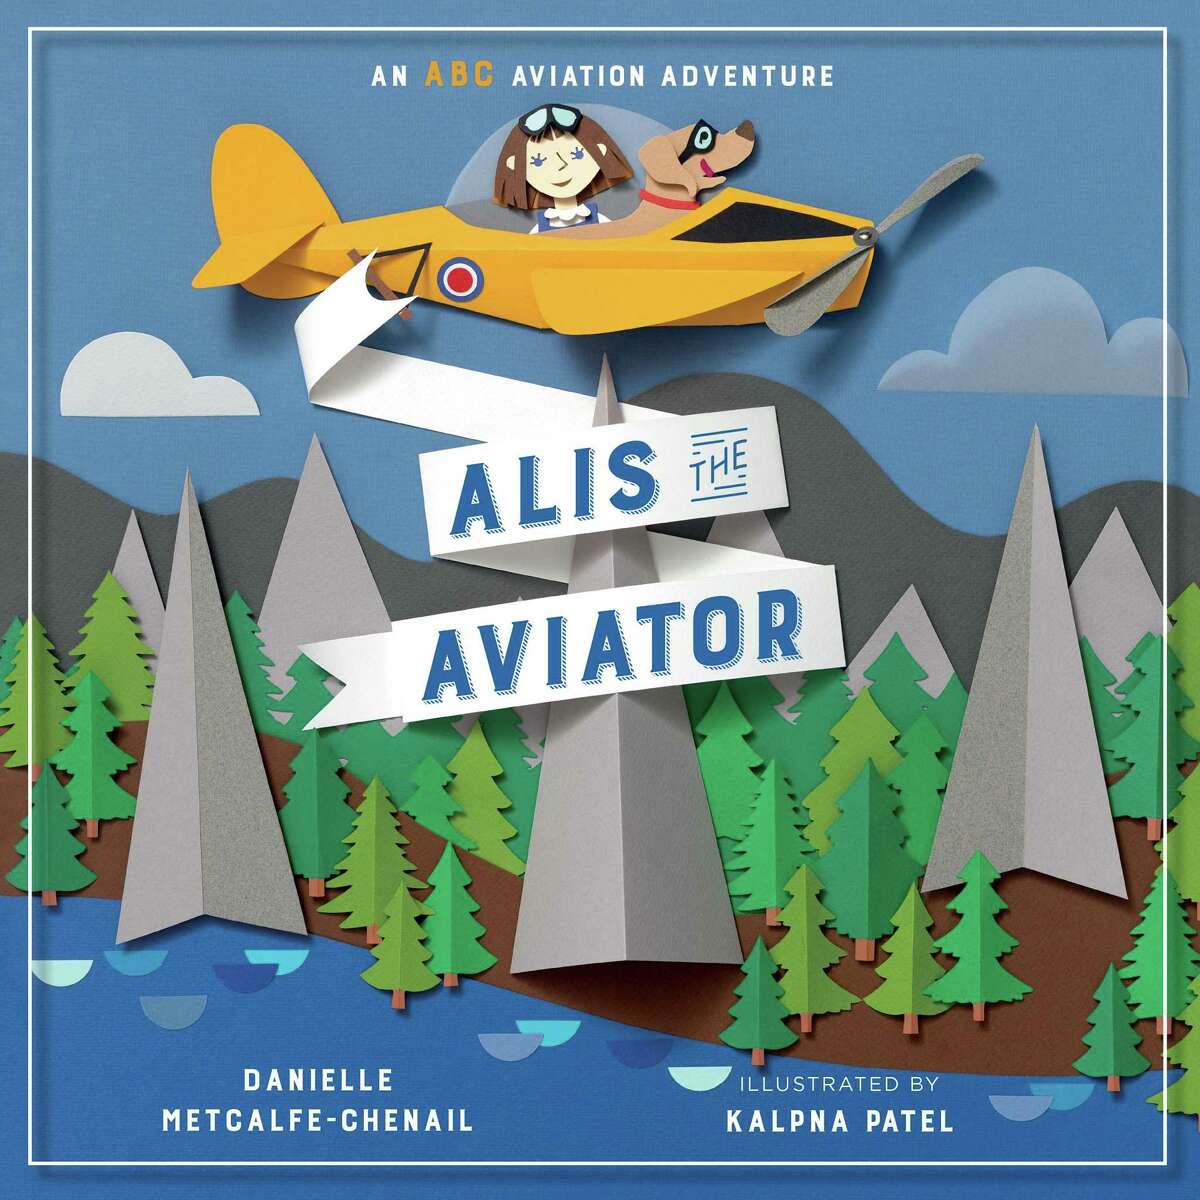 CHILDREN'S BOOKS: "Alis the Aviator" by Missouri City author Danielle Metcalf-Chenail and illustrated by Kalpna Patel. for ages 4-8. $21.99